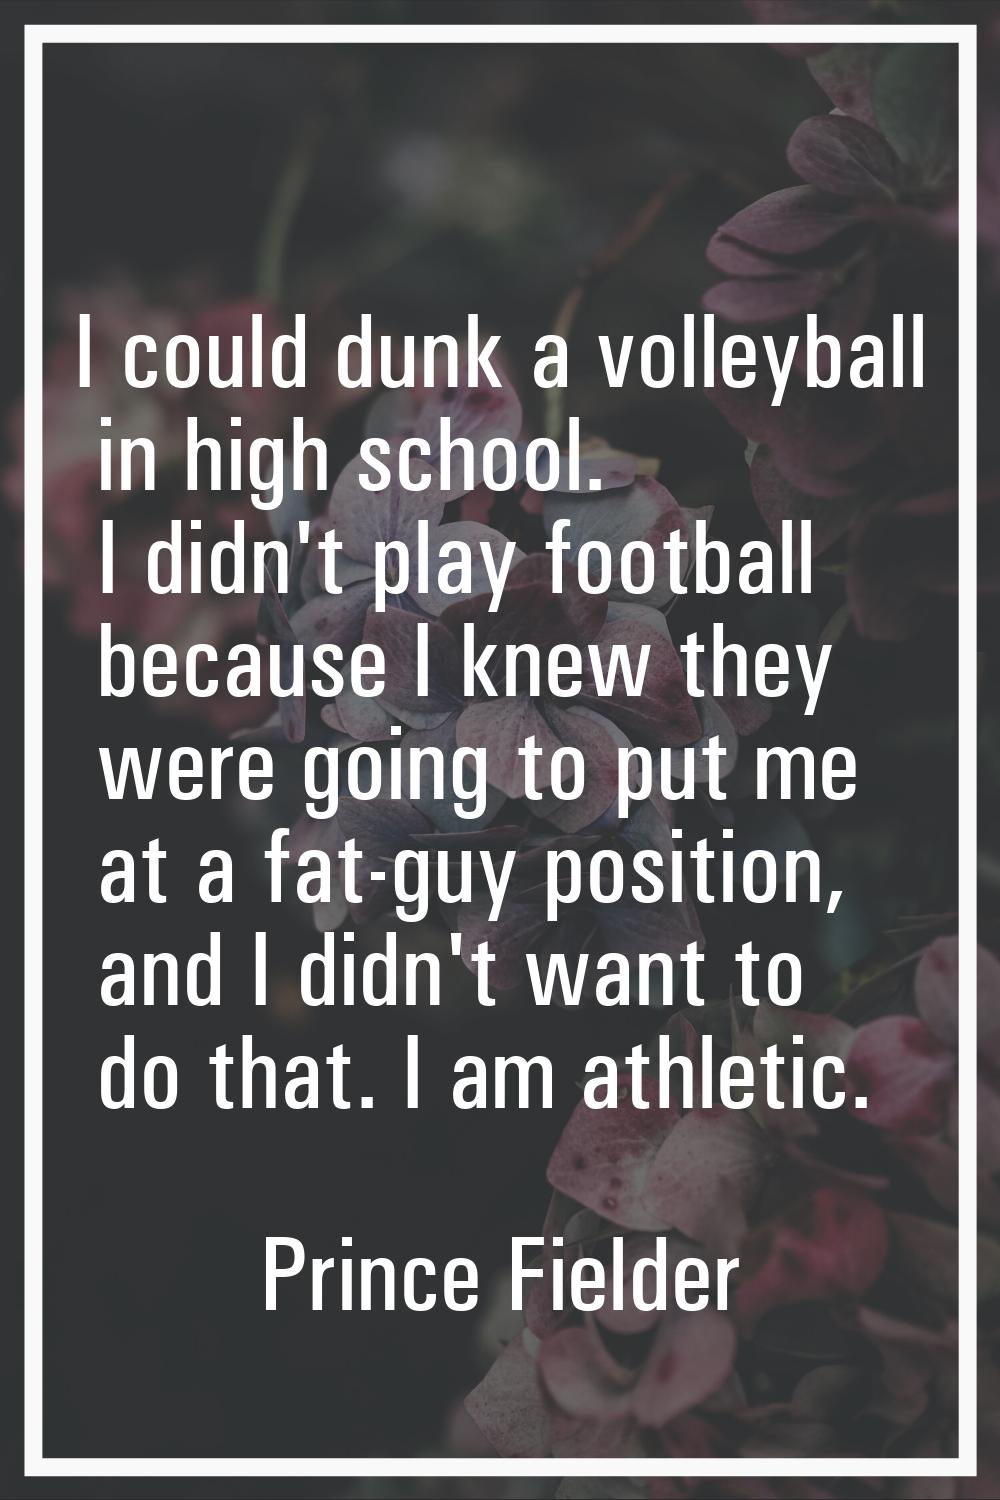 I could dunk a volleyball in high school. I didn't play football because I knew they were going to 